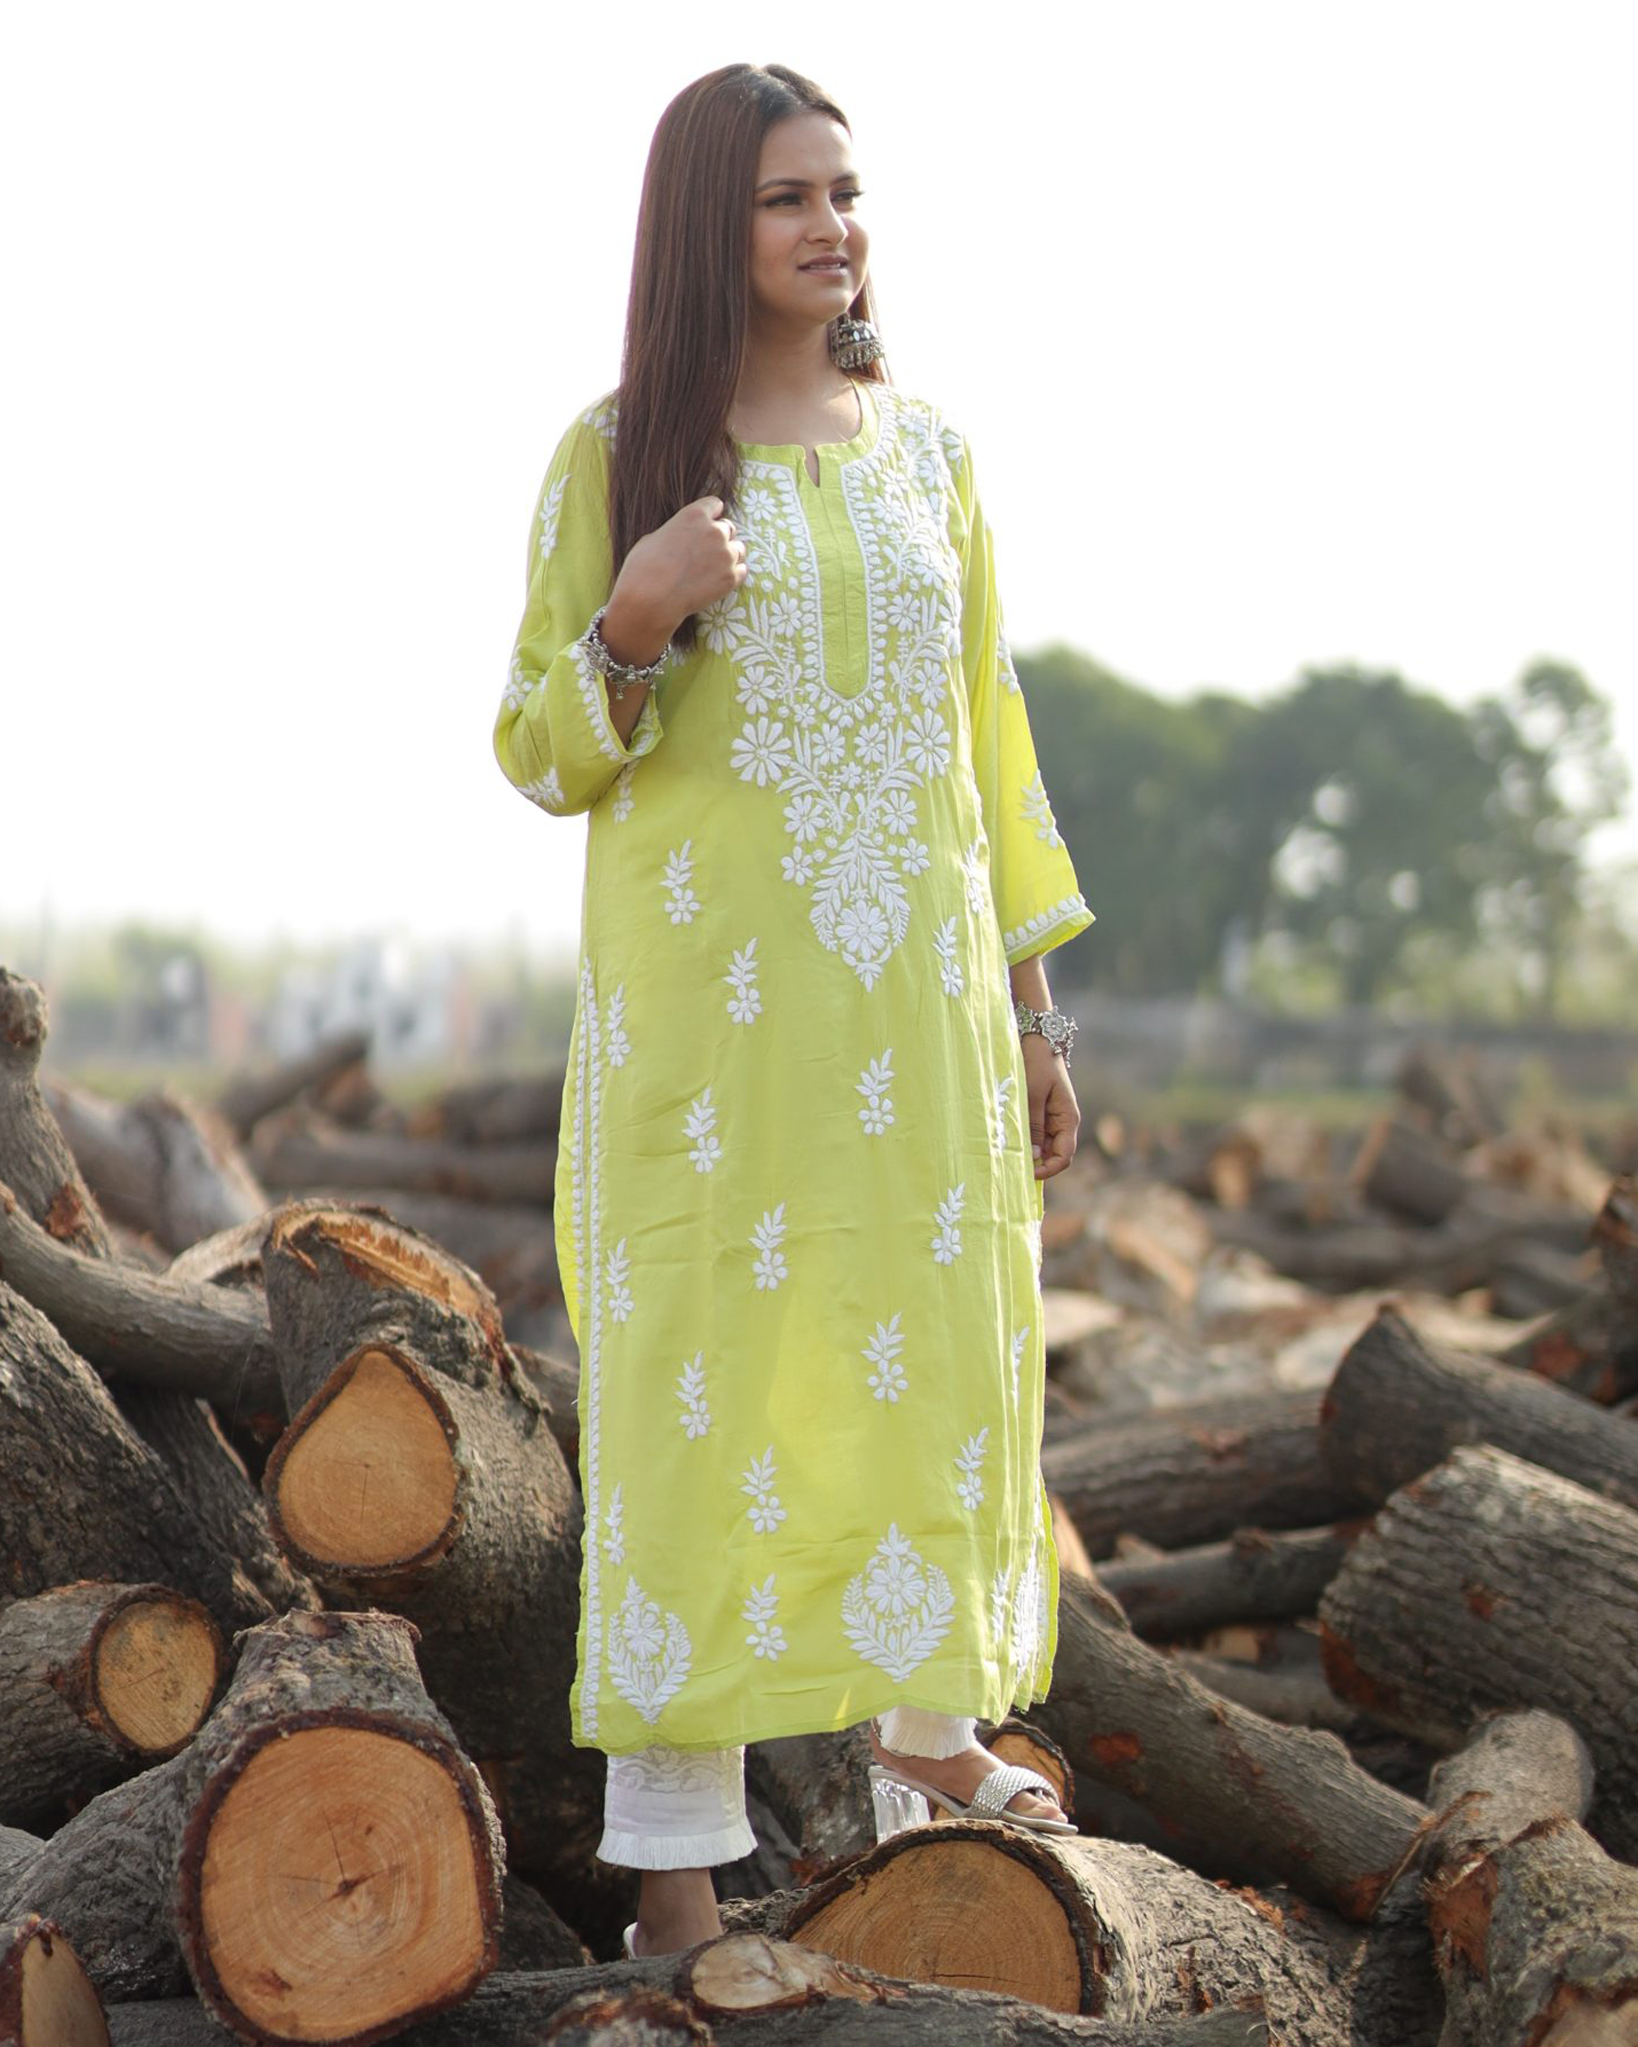 Parrot Green Yellow Kurtis Online Shopping for Women at Low Prices